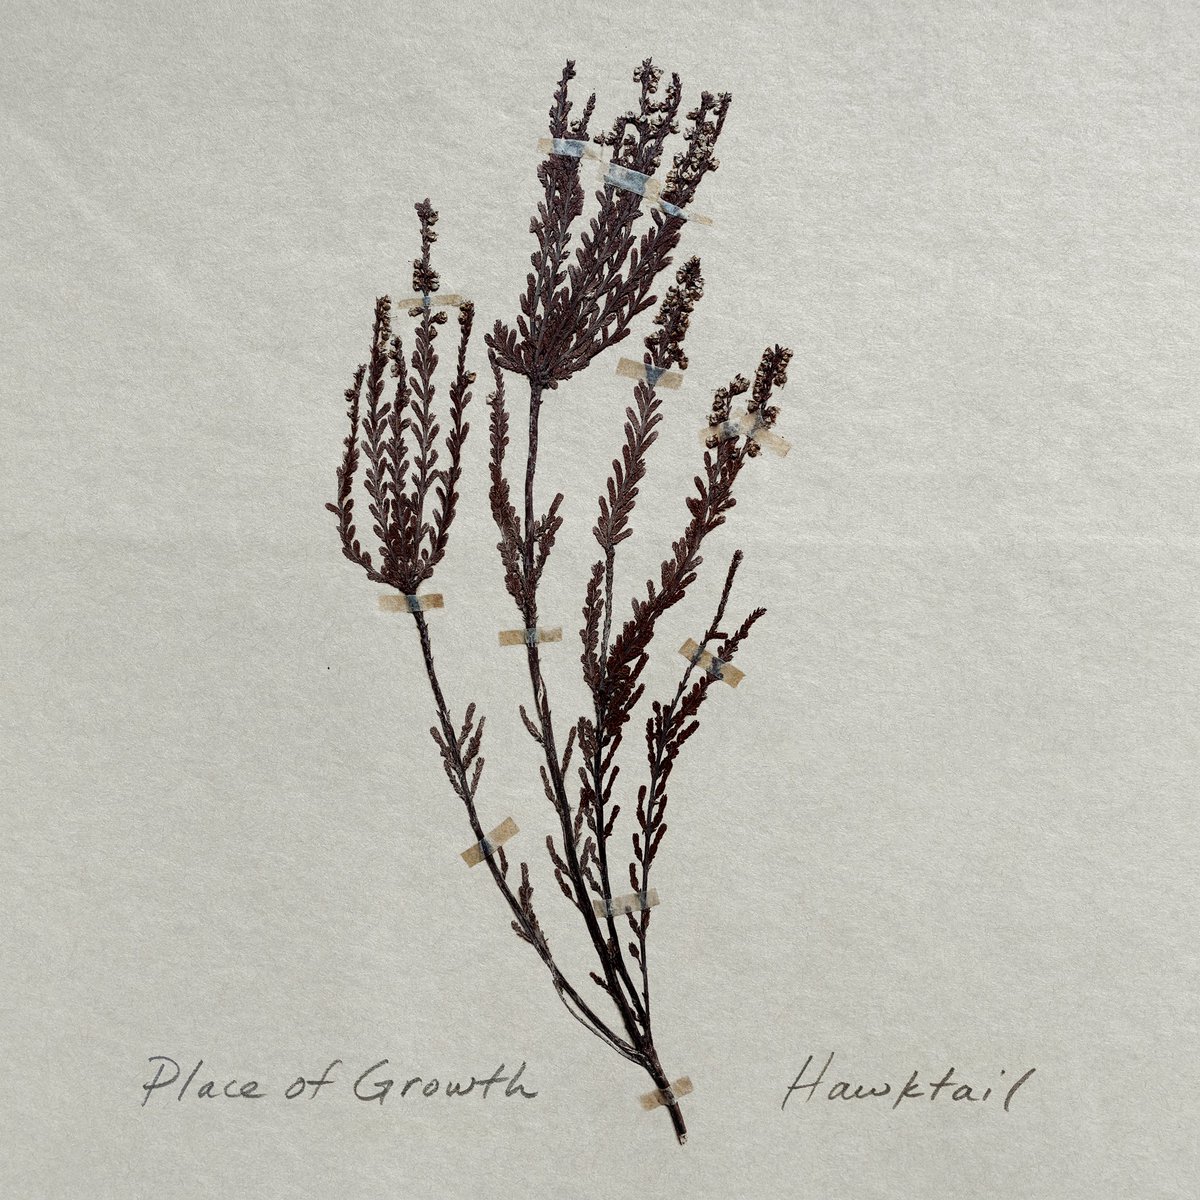 Our new record, Place of Growth, is out now! Click here to listen: lnk.to/placeofgrowth